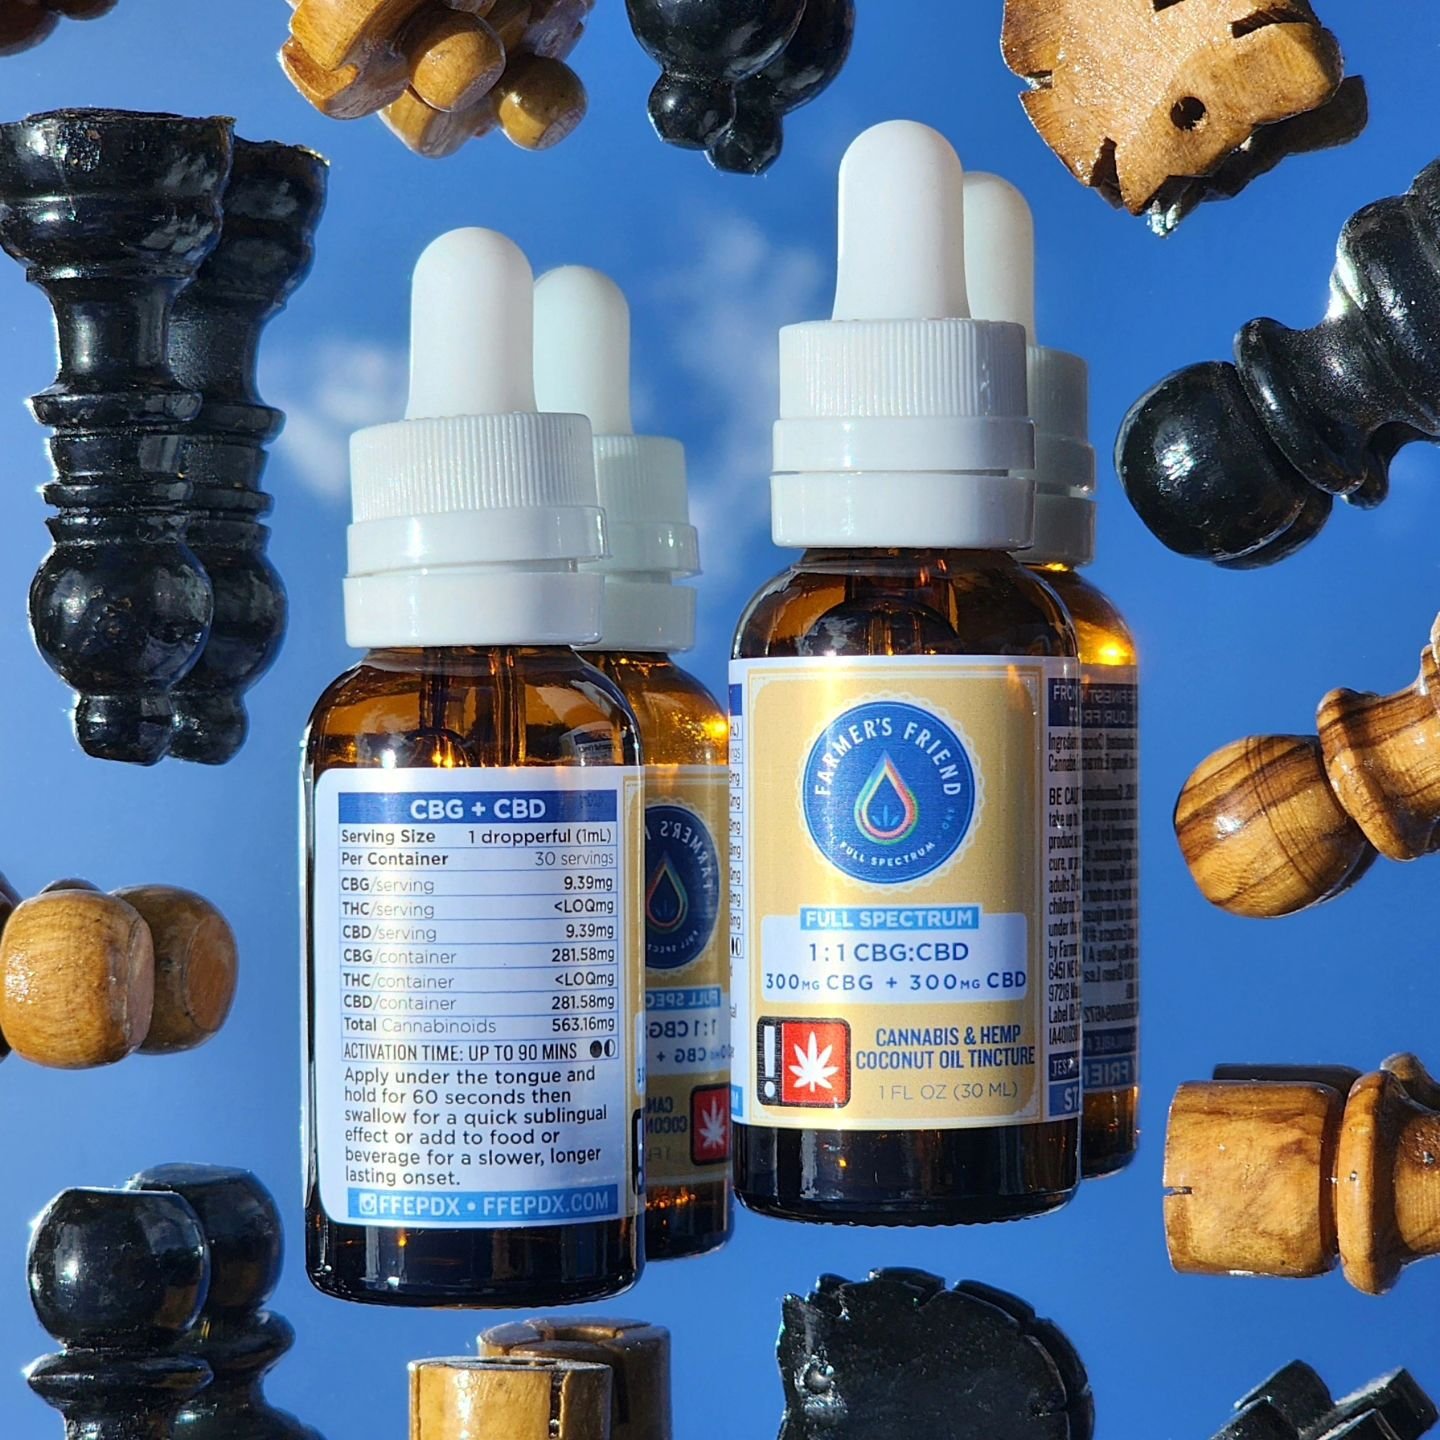 Treat yourself to two of our favorite therapeutic cannabinoids that help keep your body happy and your mind on point. Allstar cannabinoid CBD is complimented by the addition of CBG (cannabigerol) to support focus, making this tincture the perfect day